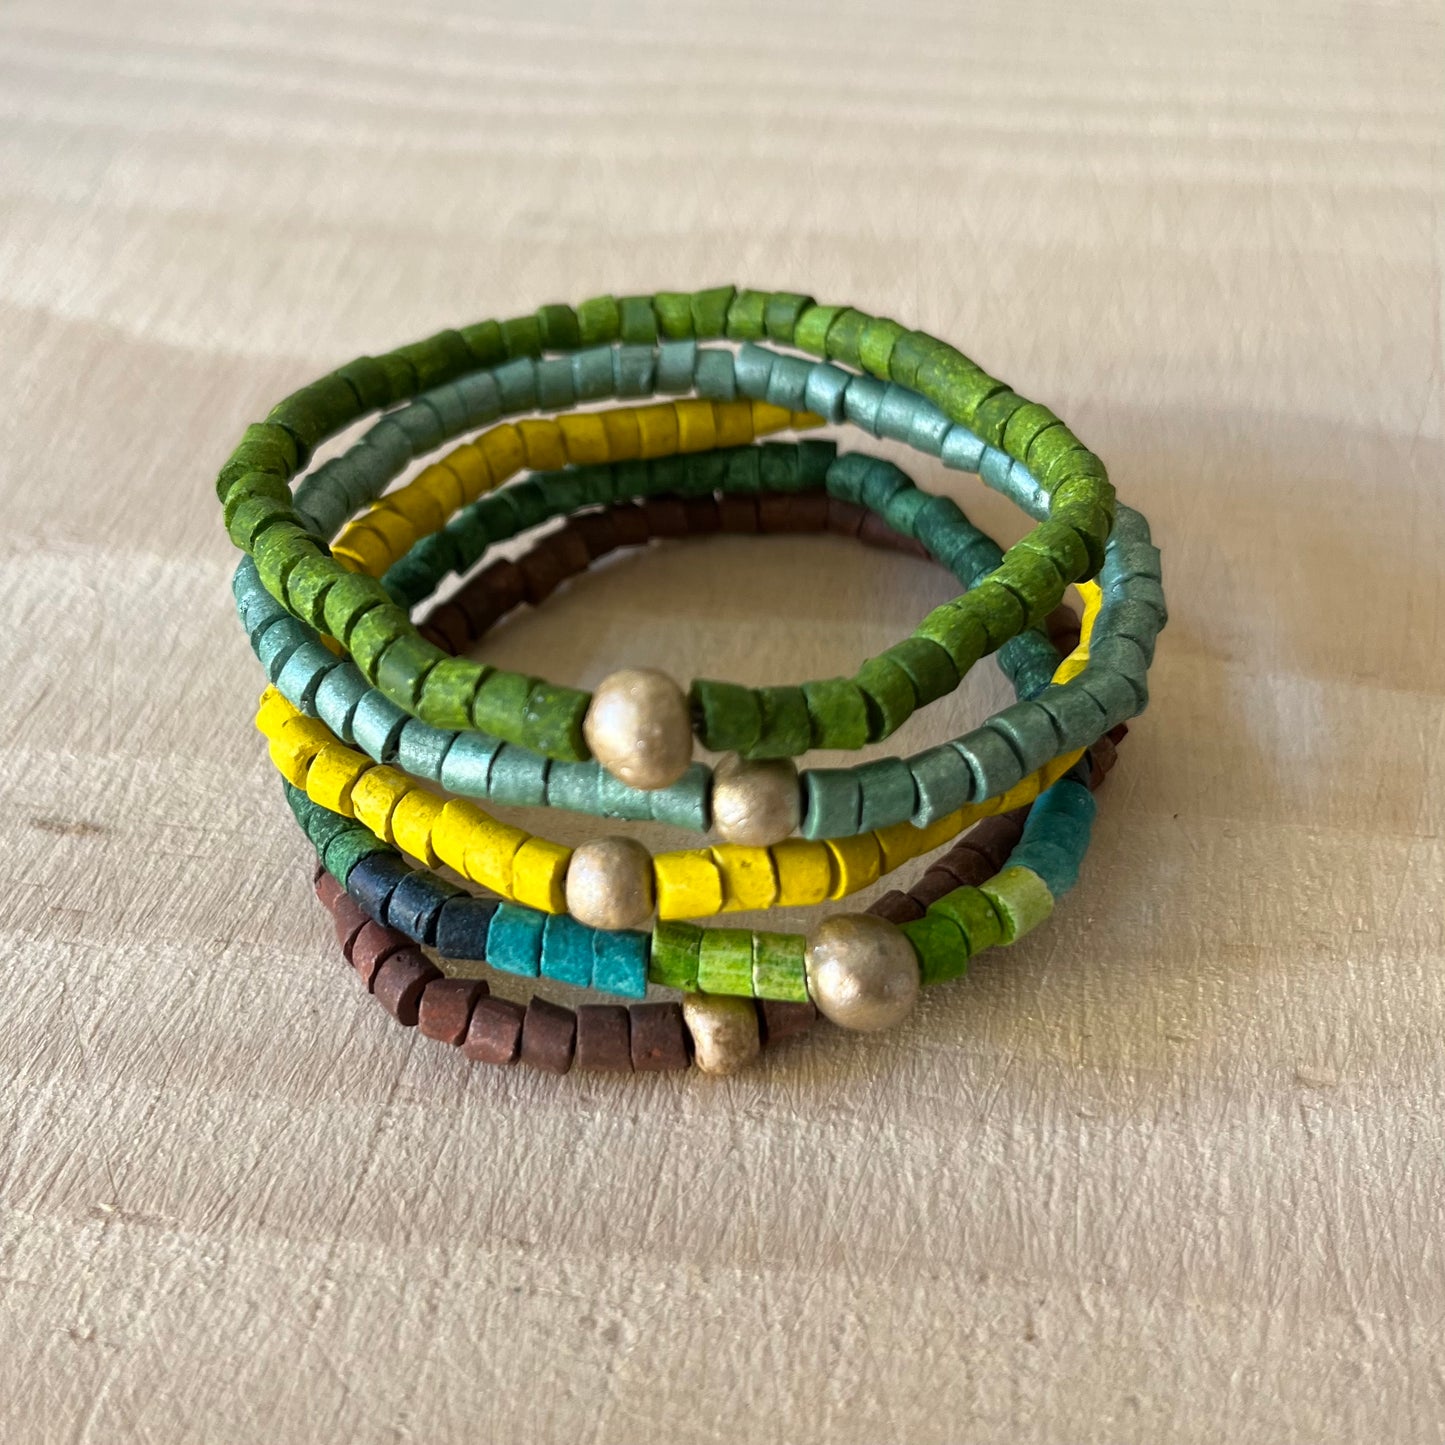 Ocean Blue And Green Stretchy Clay Bead Bracelet